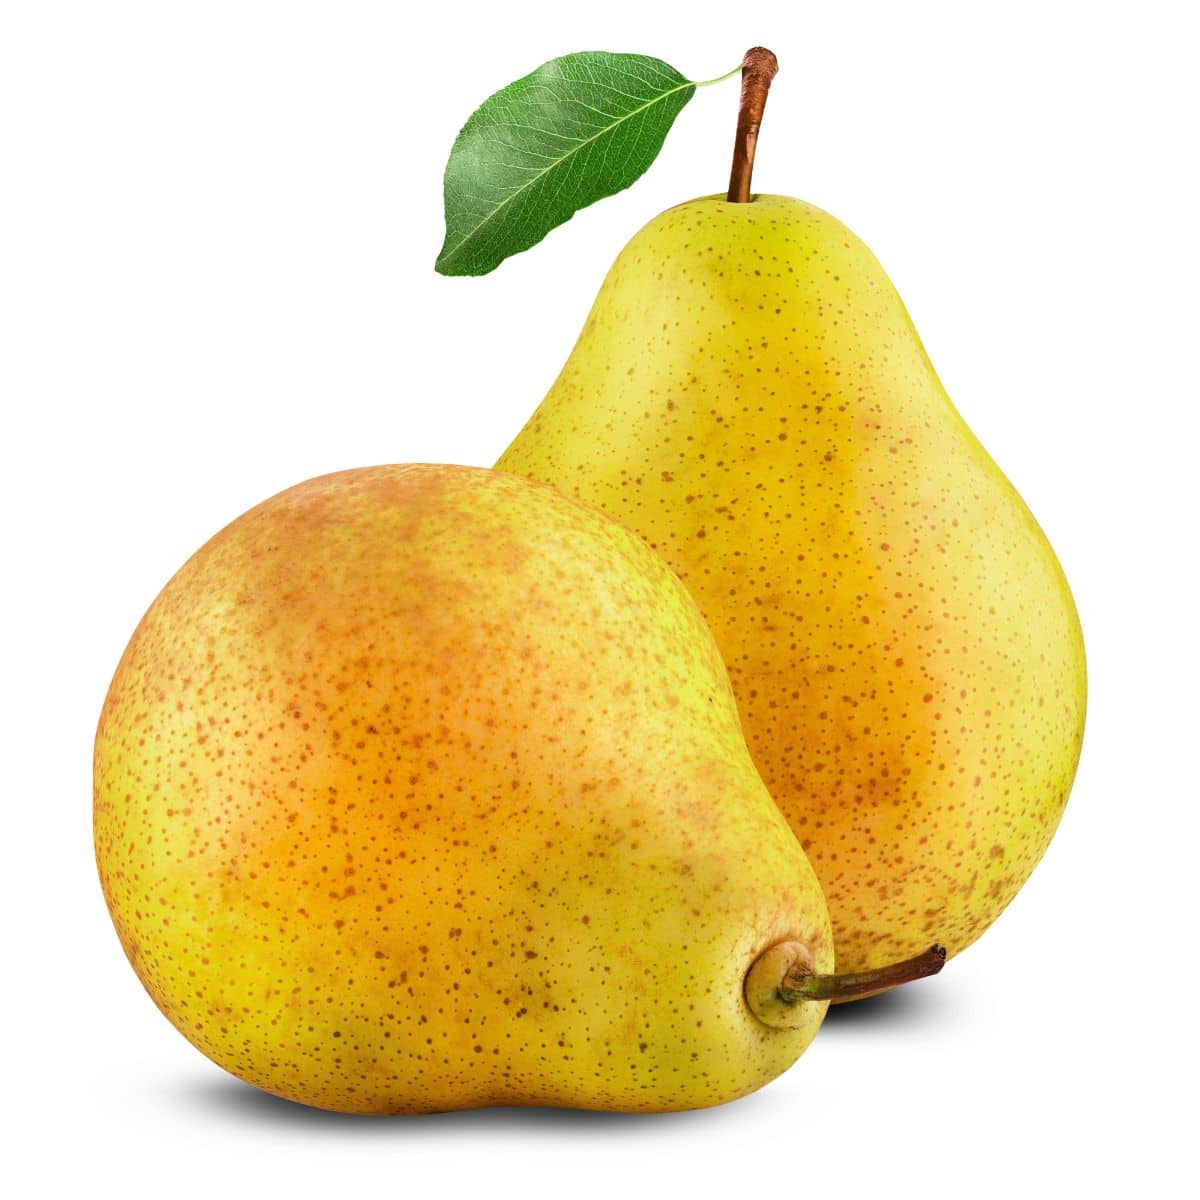 Two Williams pears on a white background.